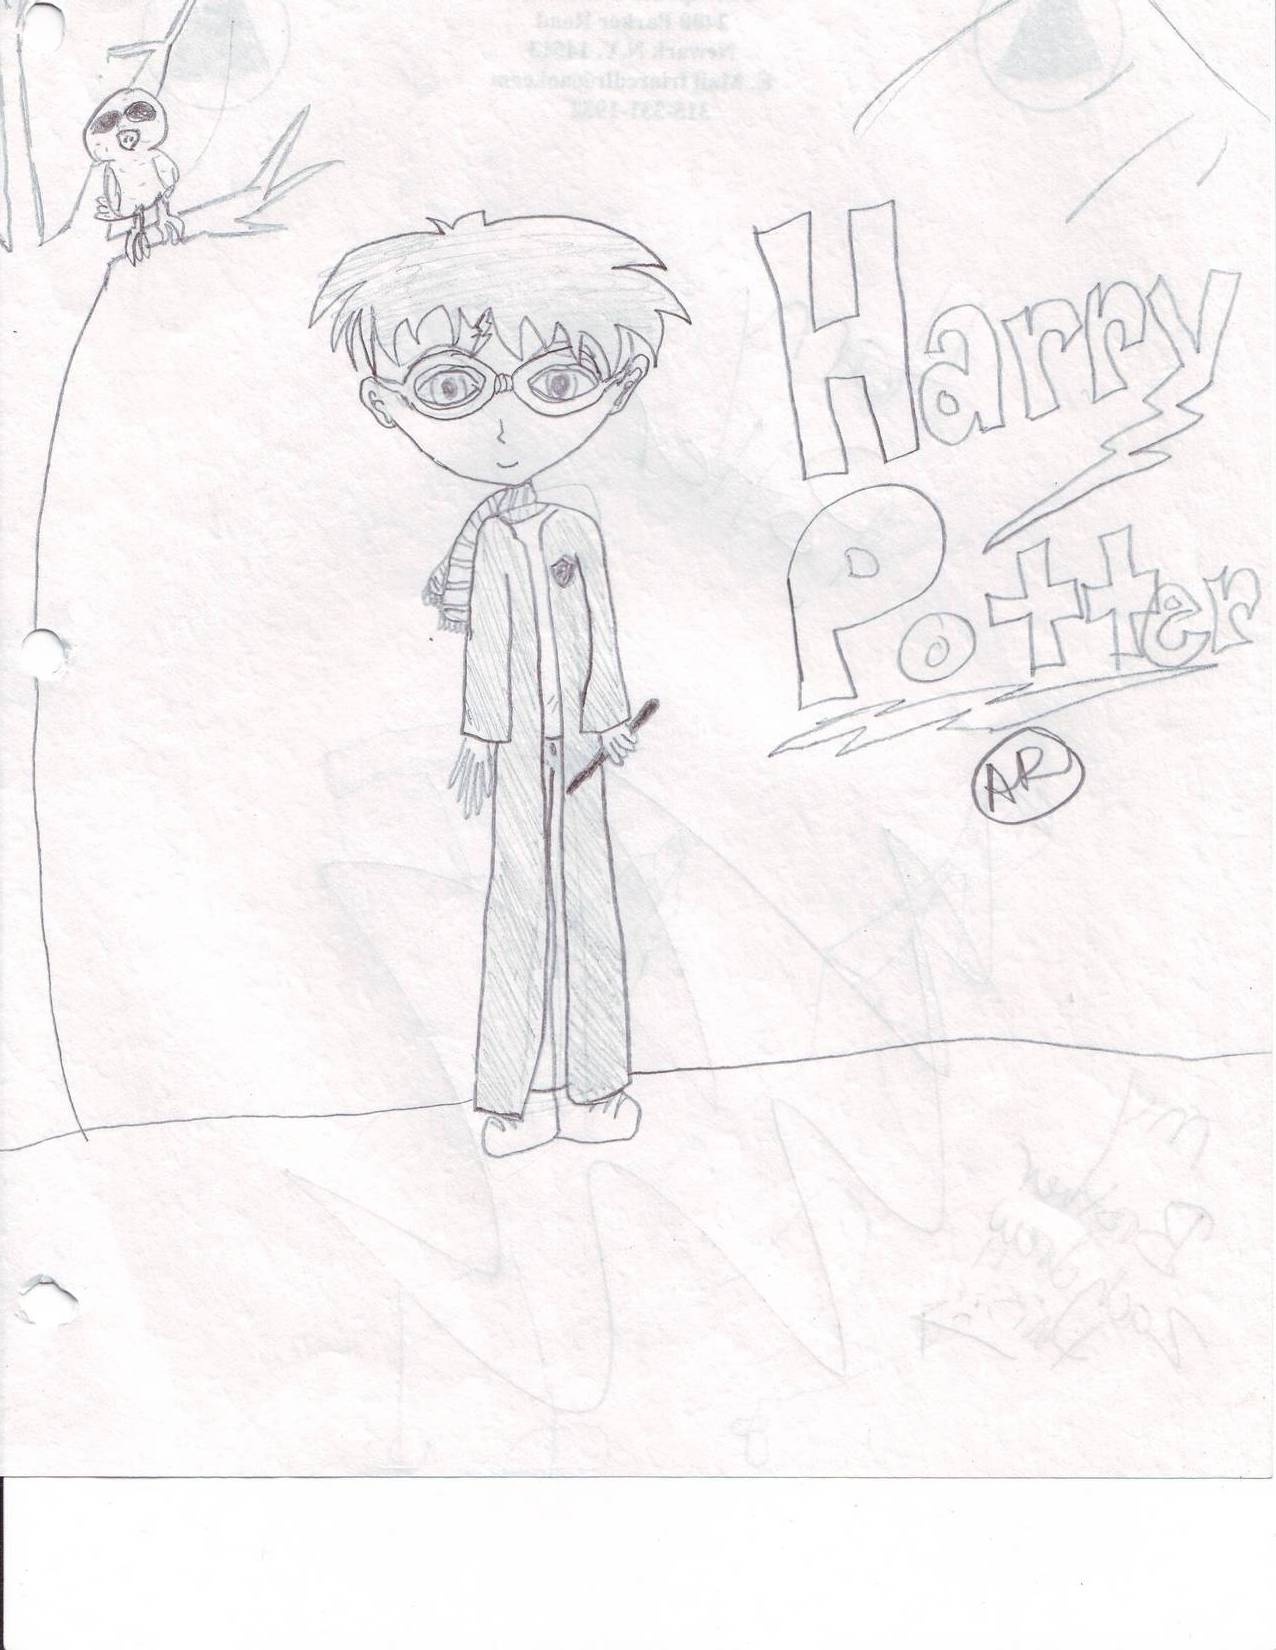 Just a chibi Harry Potter by Ferret_Avatar22